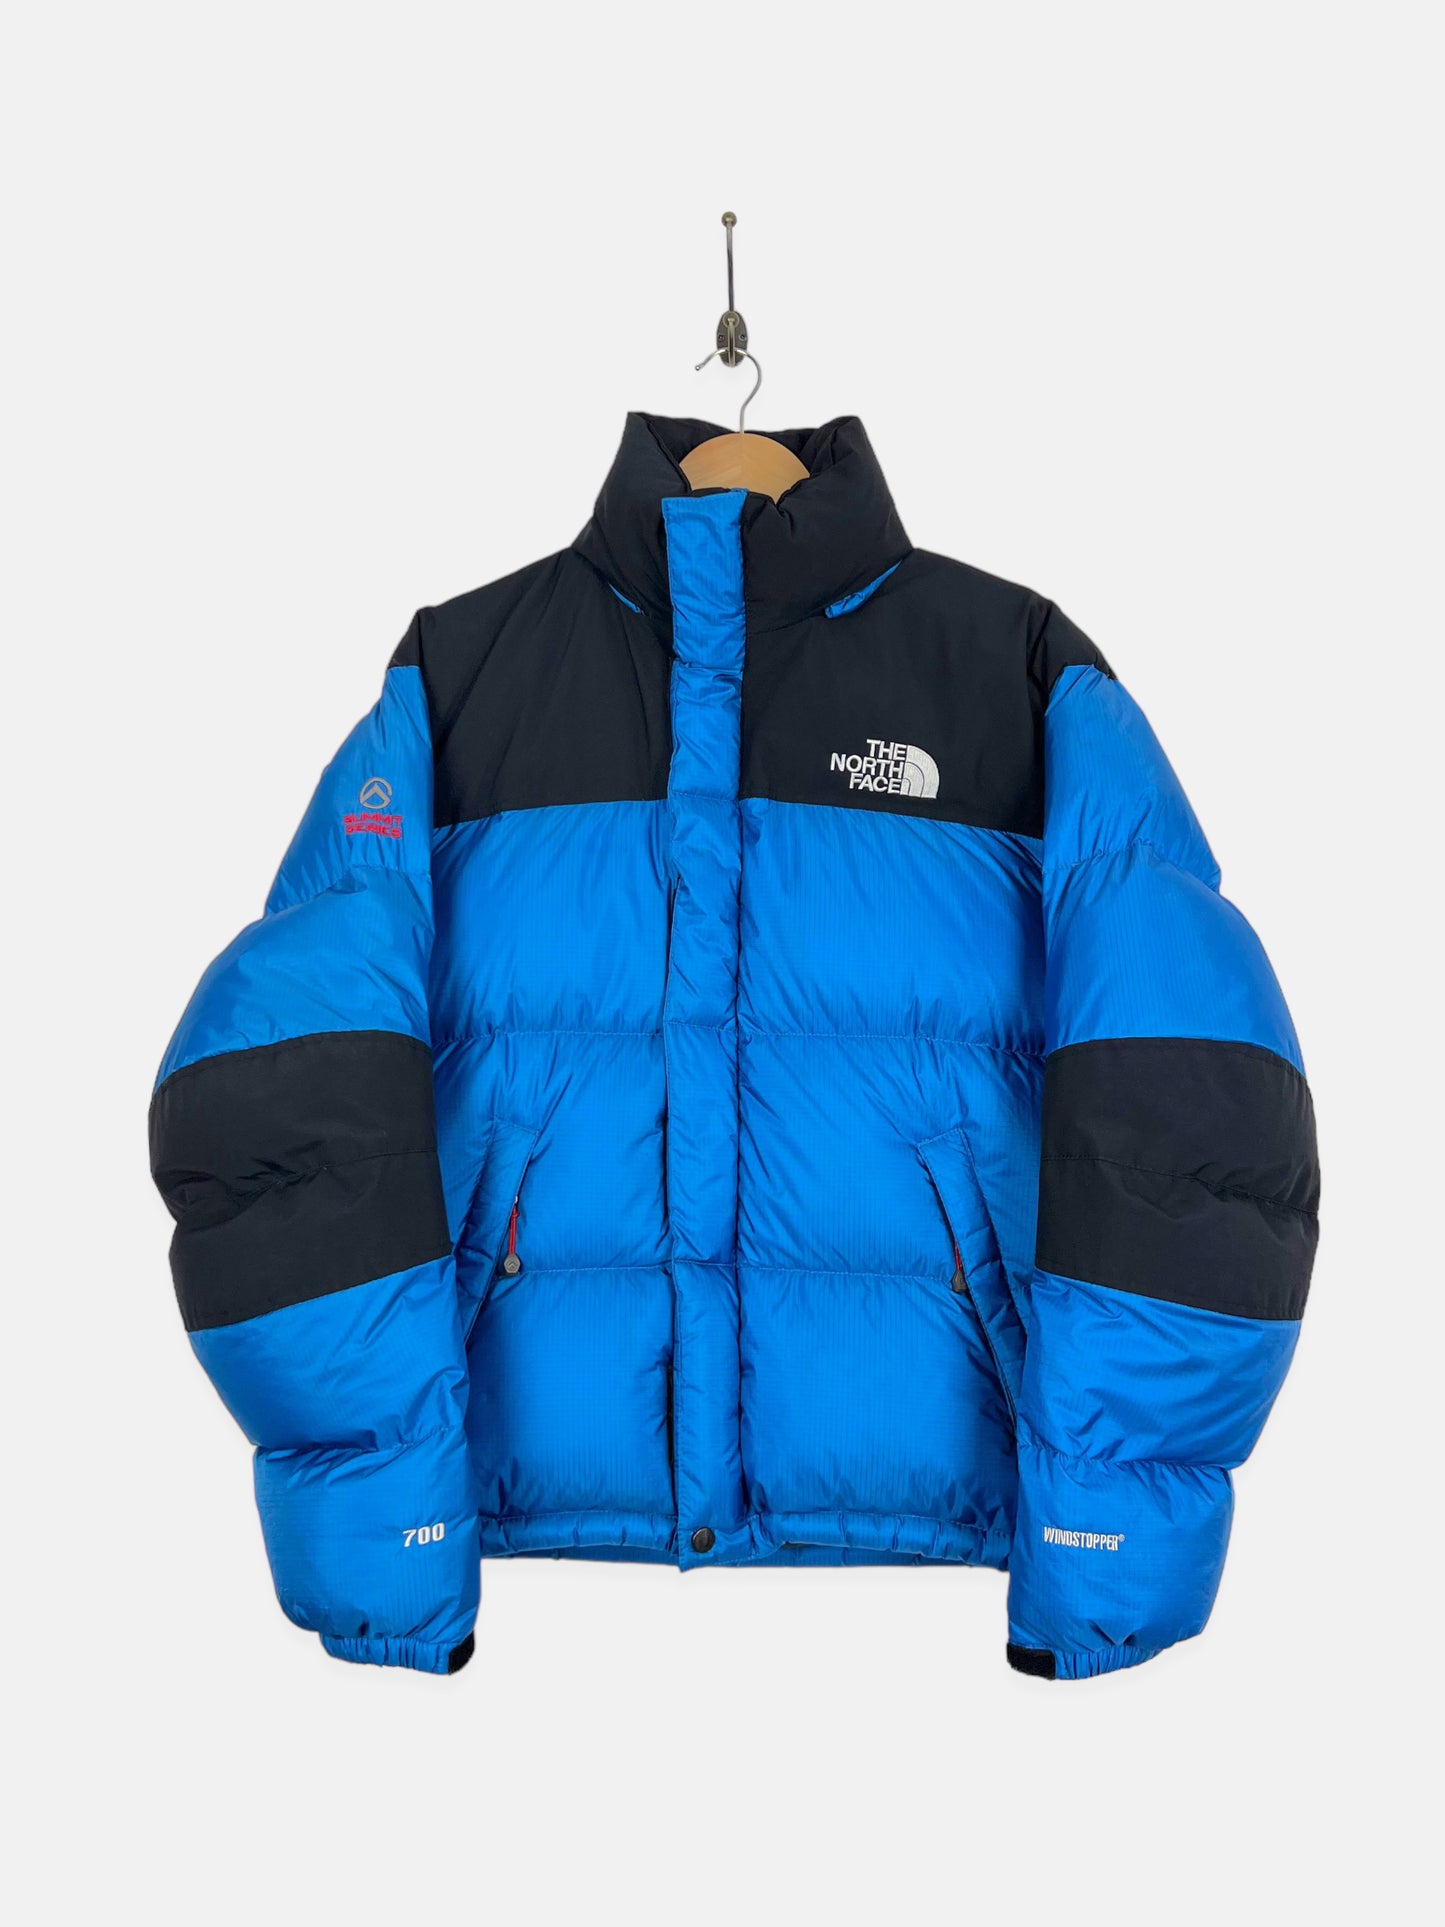 90's The North Face Summit Series 700 Embroidered Vintage Puffer Jacket Size M